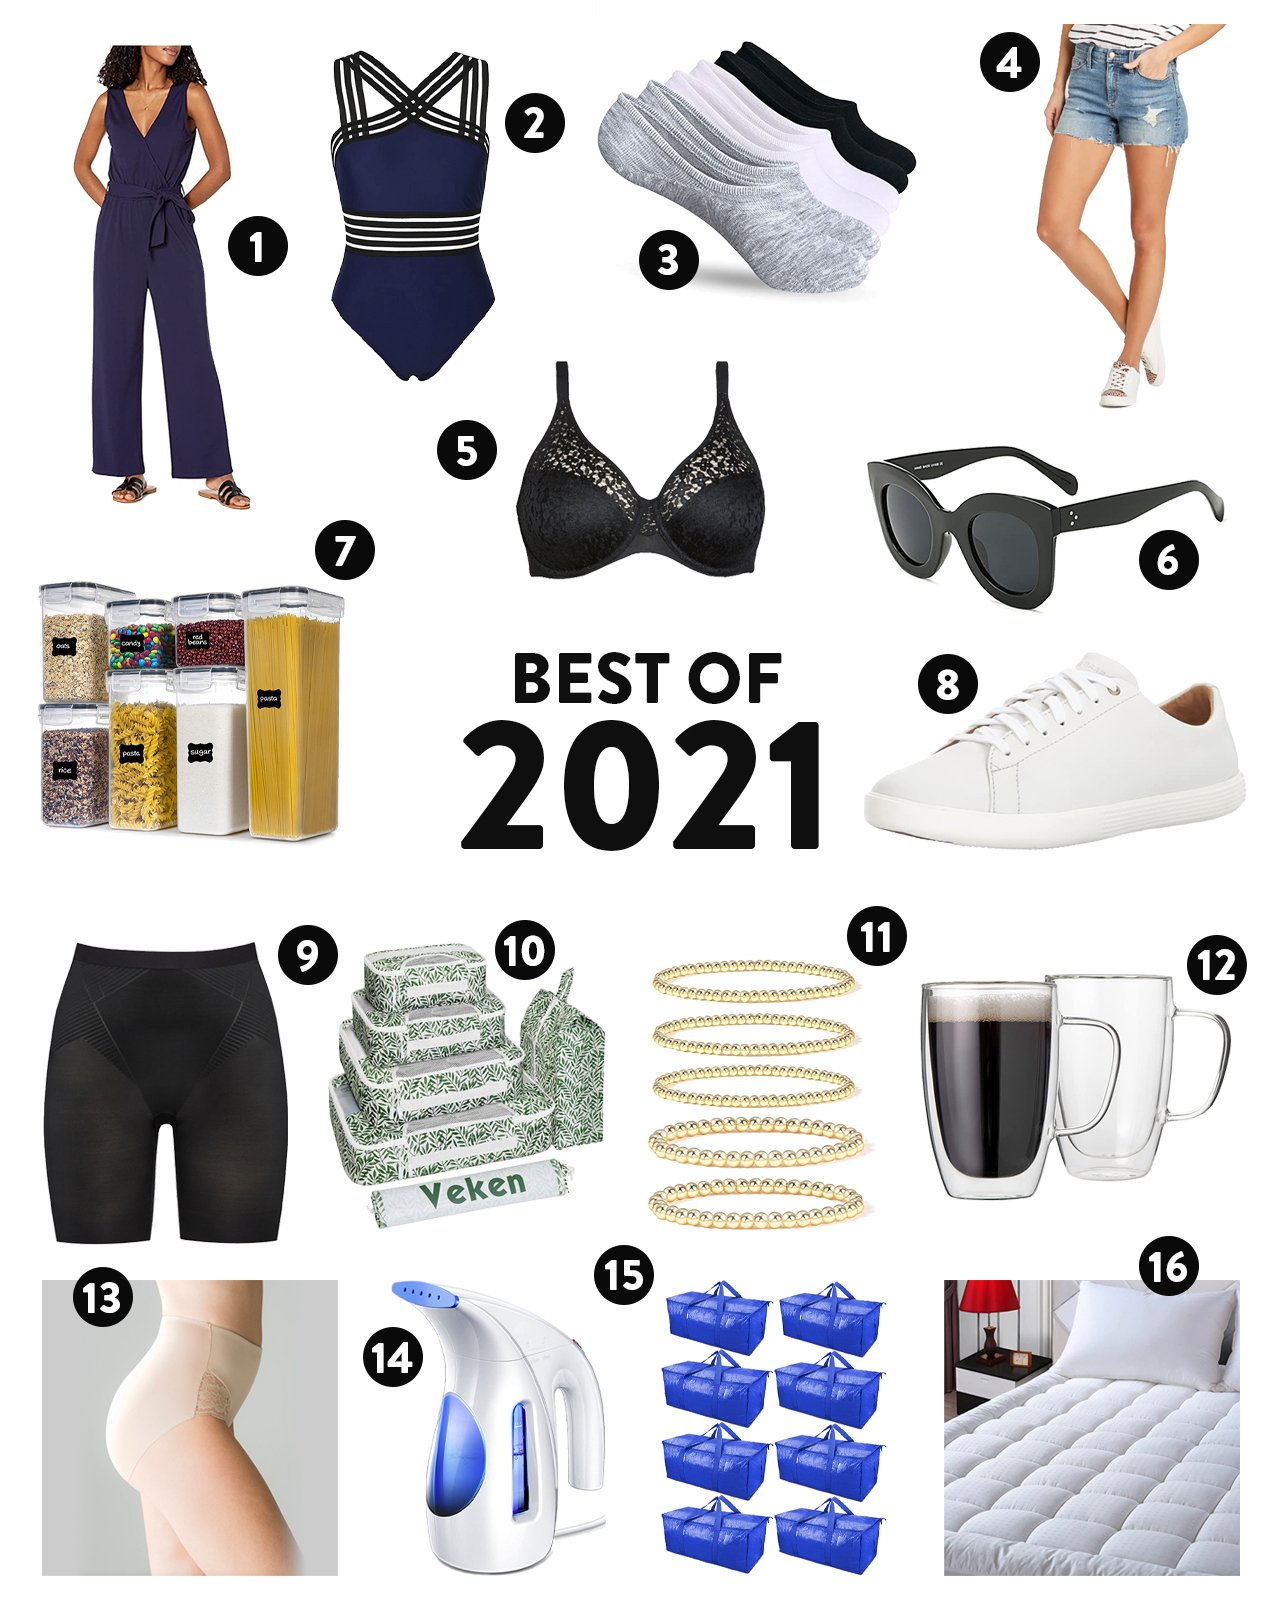 New Year's Eve Underwear Tradition: What Color Will You Wear? — Caralyn  Mirand Koch